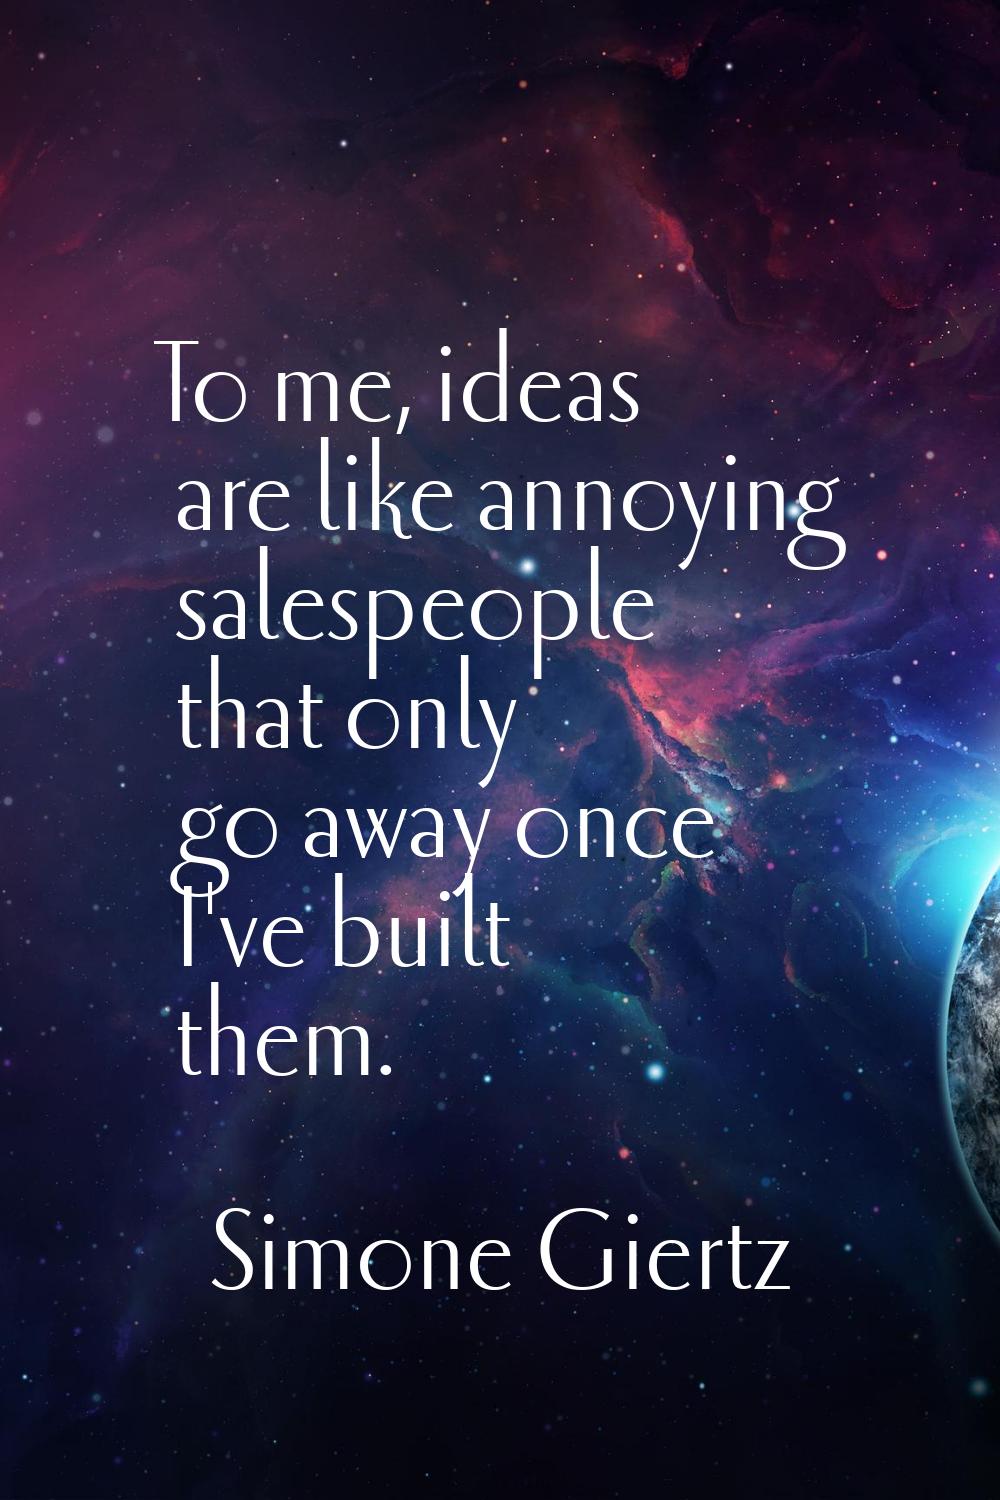 To me, ideas are like annoying salespeople that only go away once I've built them.